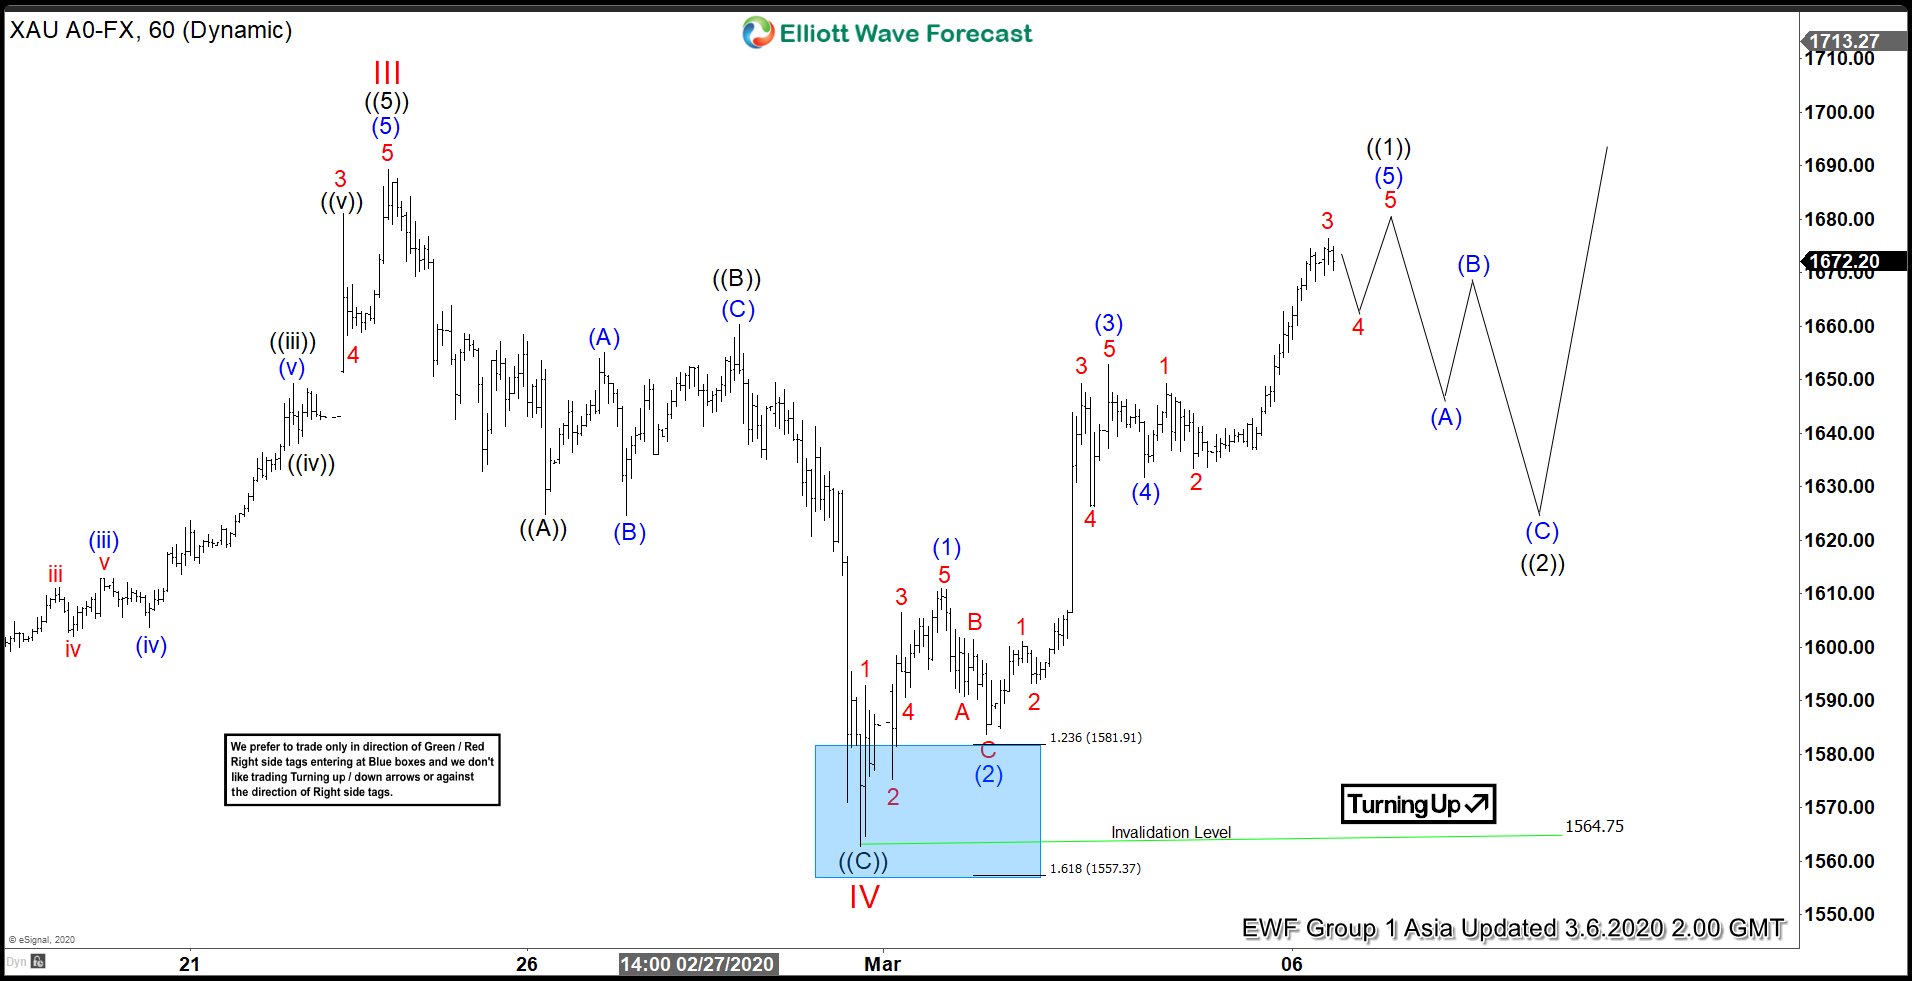 Elliott Wave View: Gold Bounced Strongly After Brief Selloff